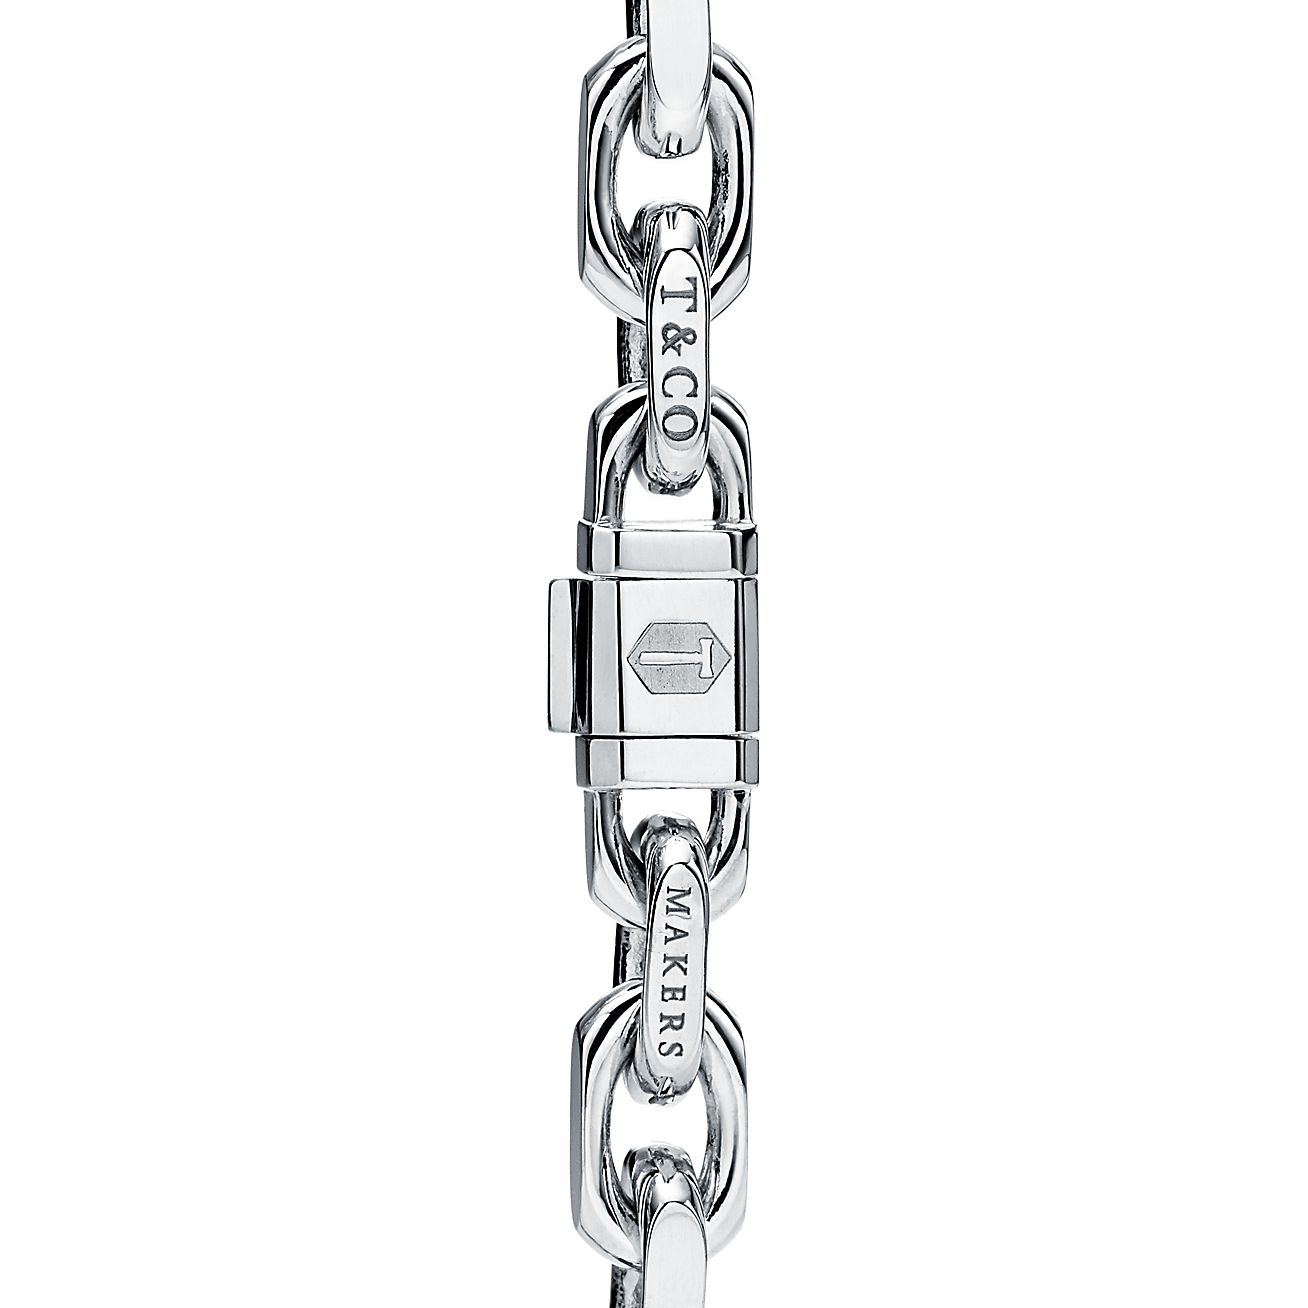 Tiffany 1837 Makers Narrow Chain Bracelet in 18K Gold, Large